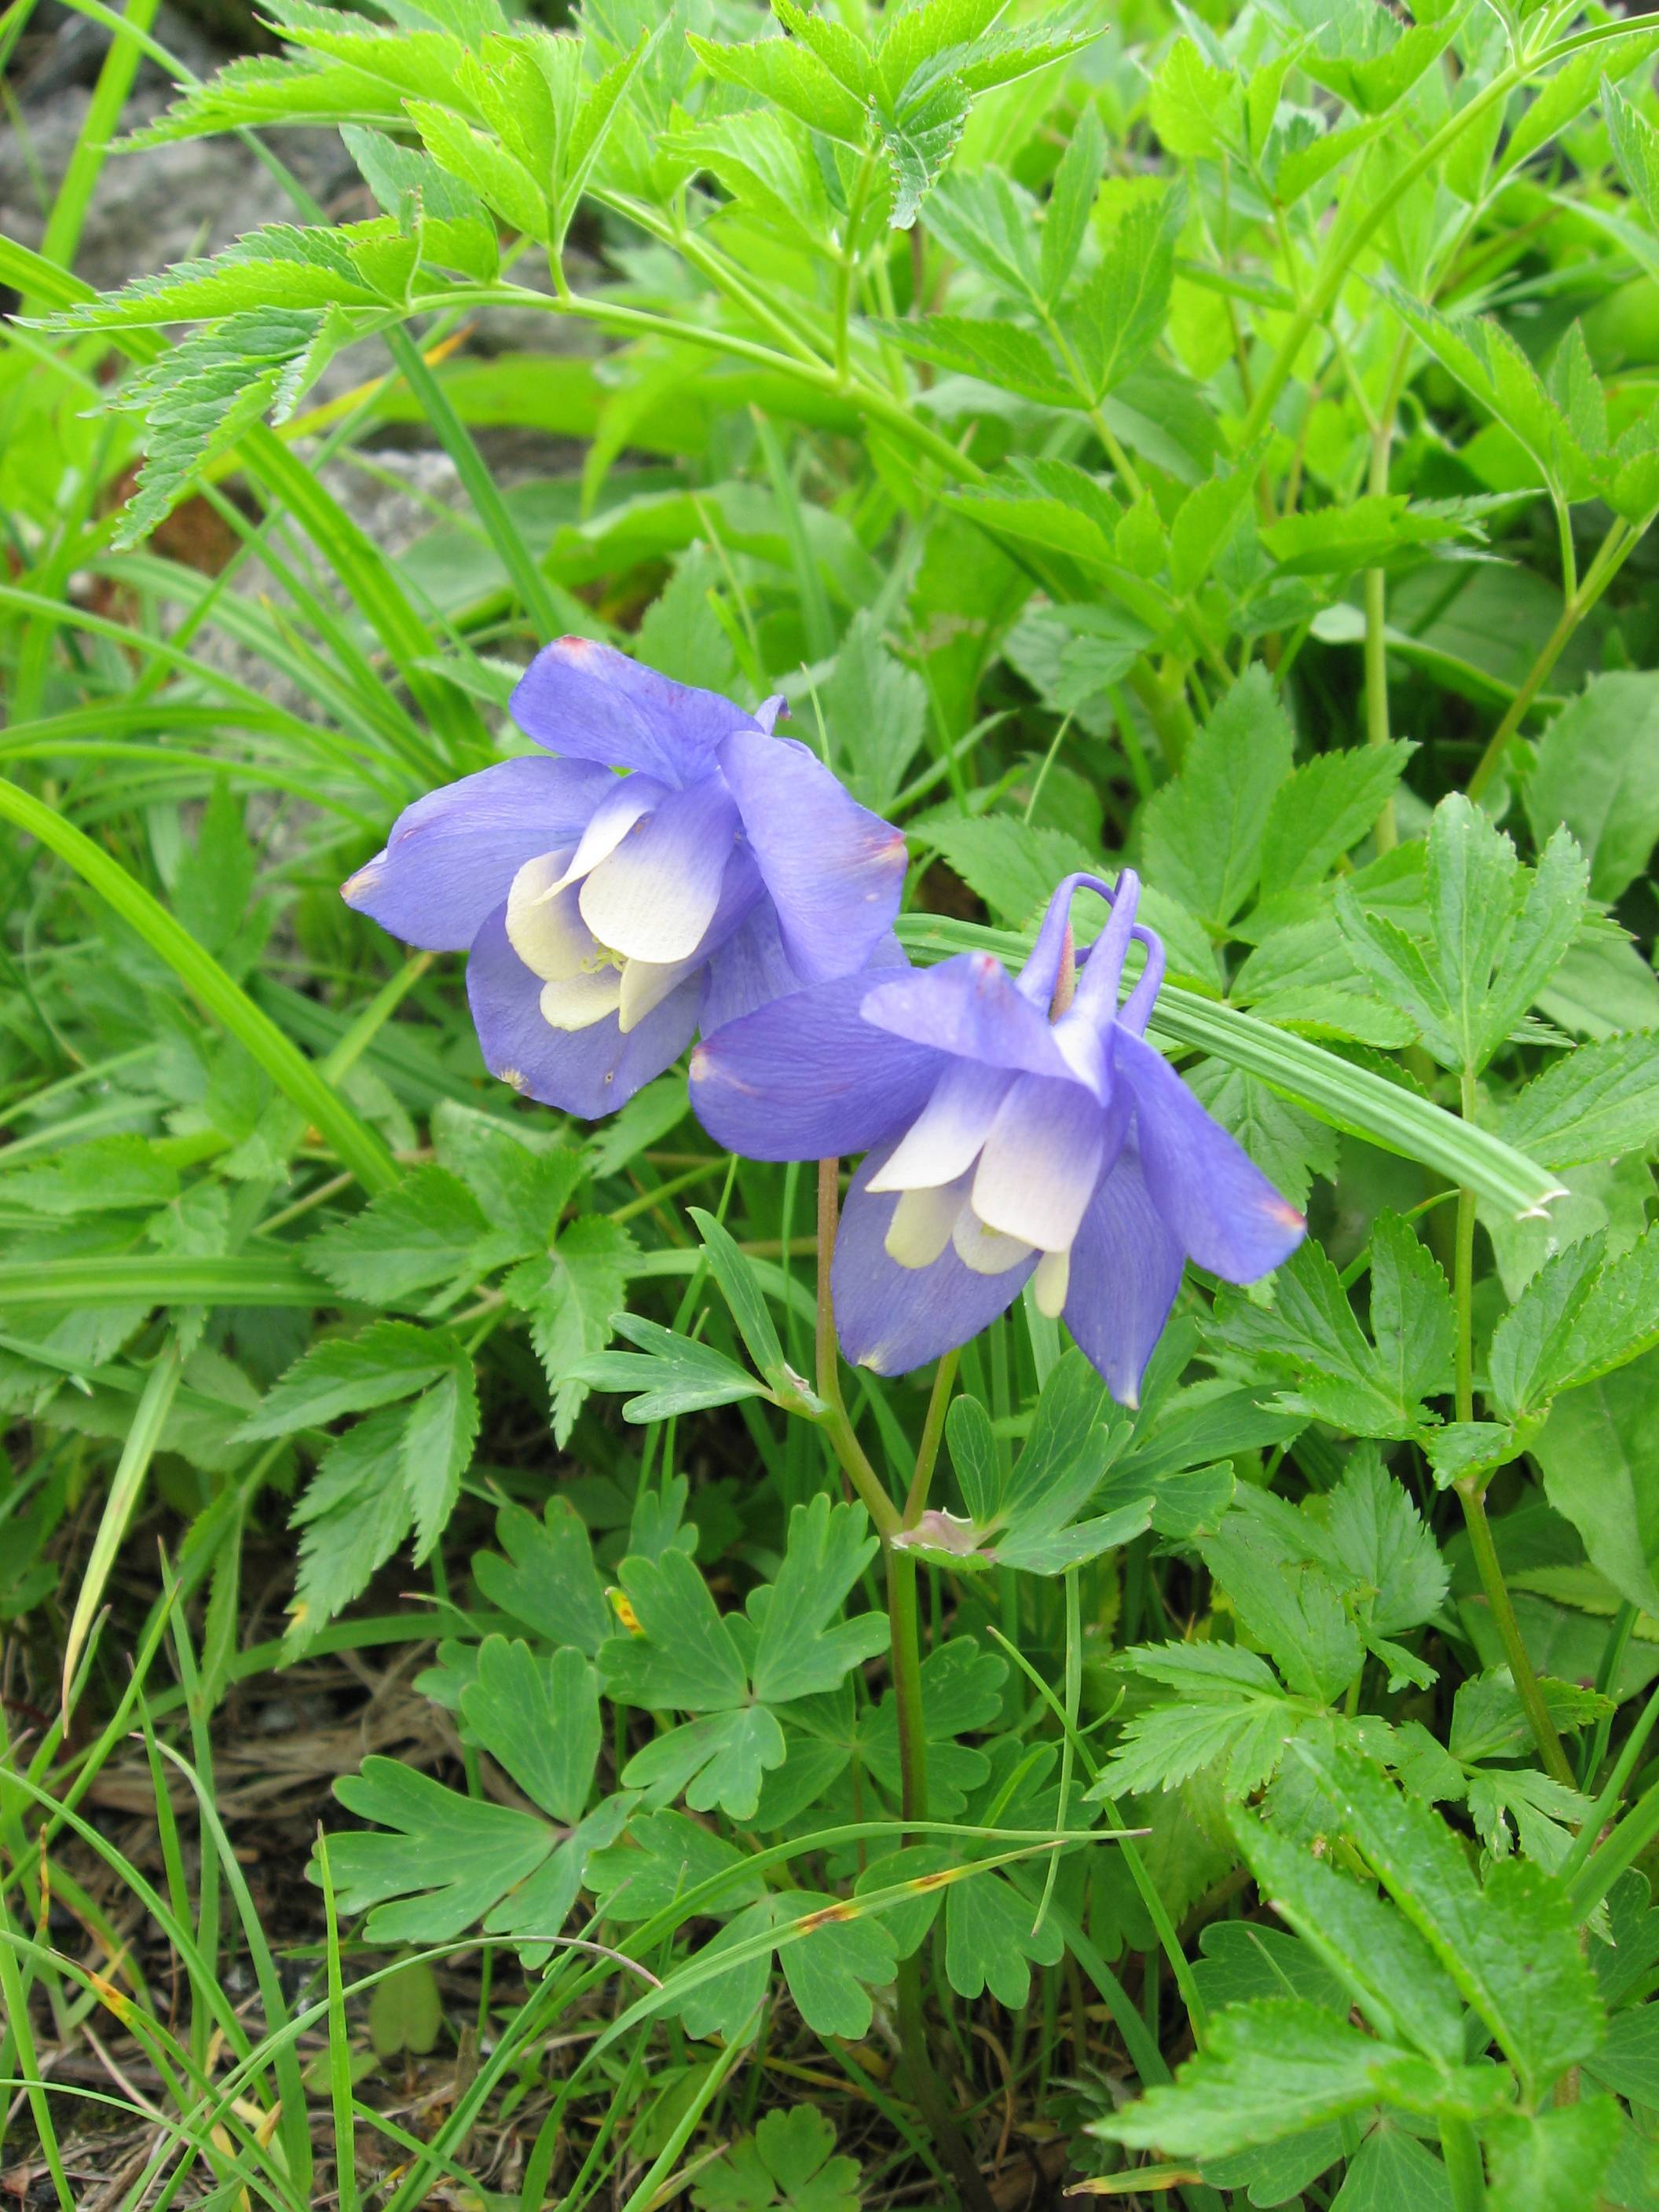 blue-white flowers with green leaves and stems